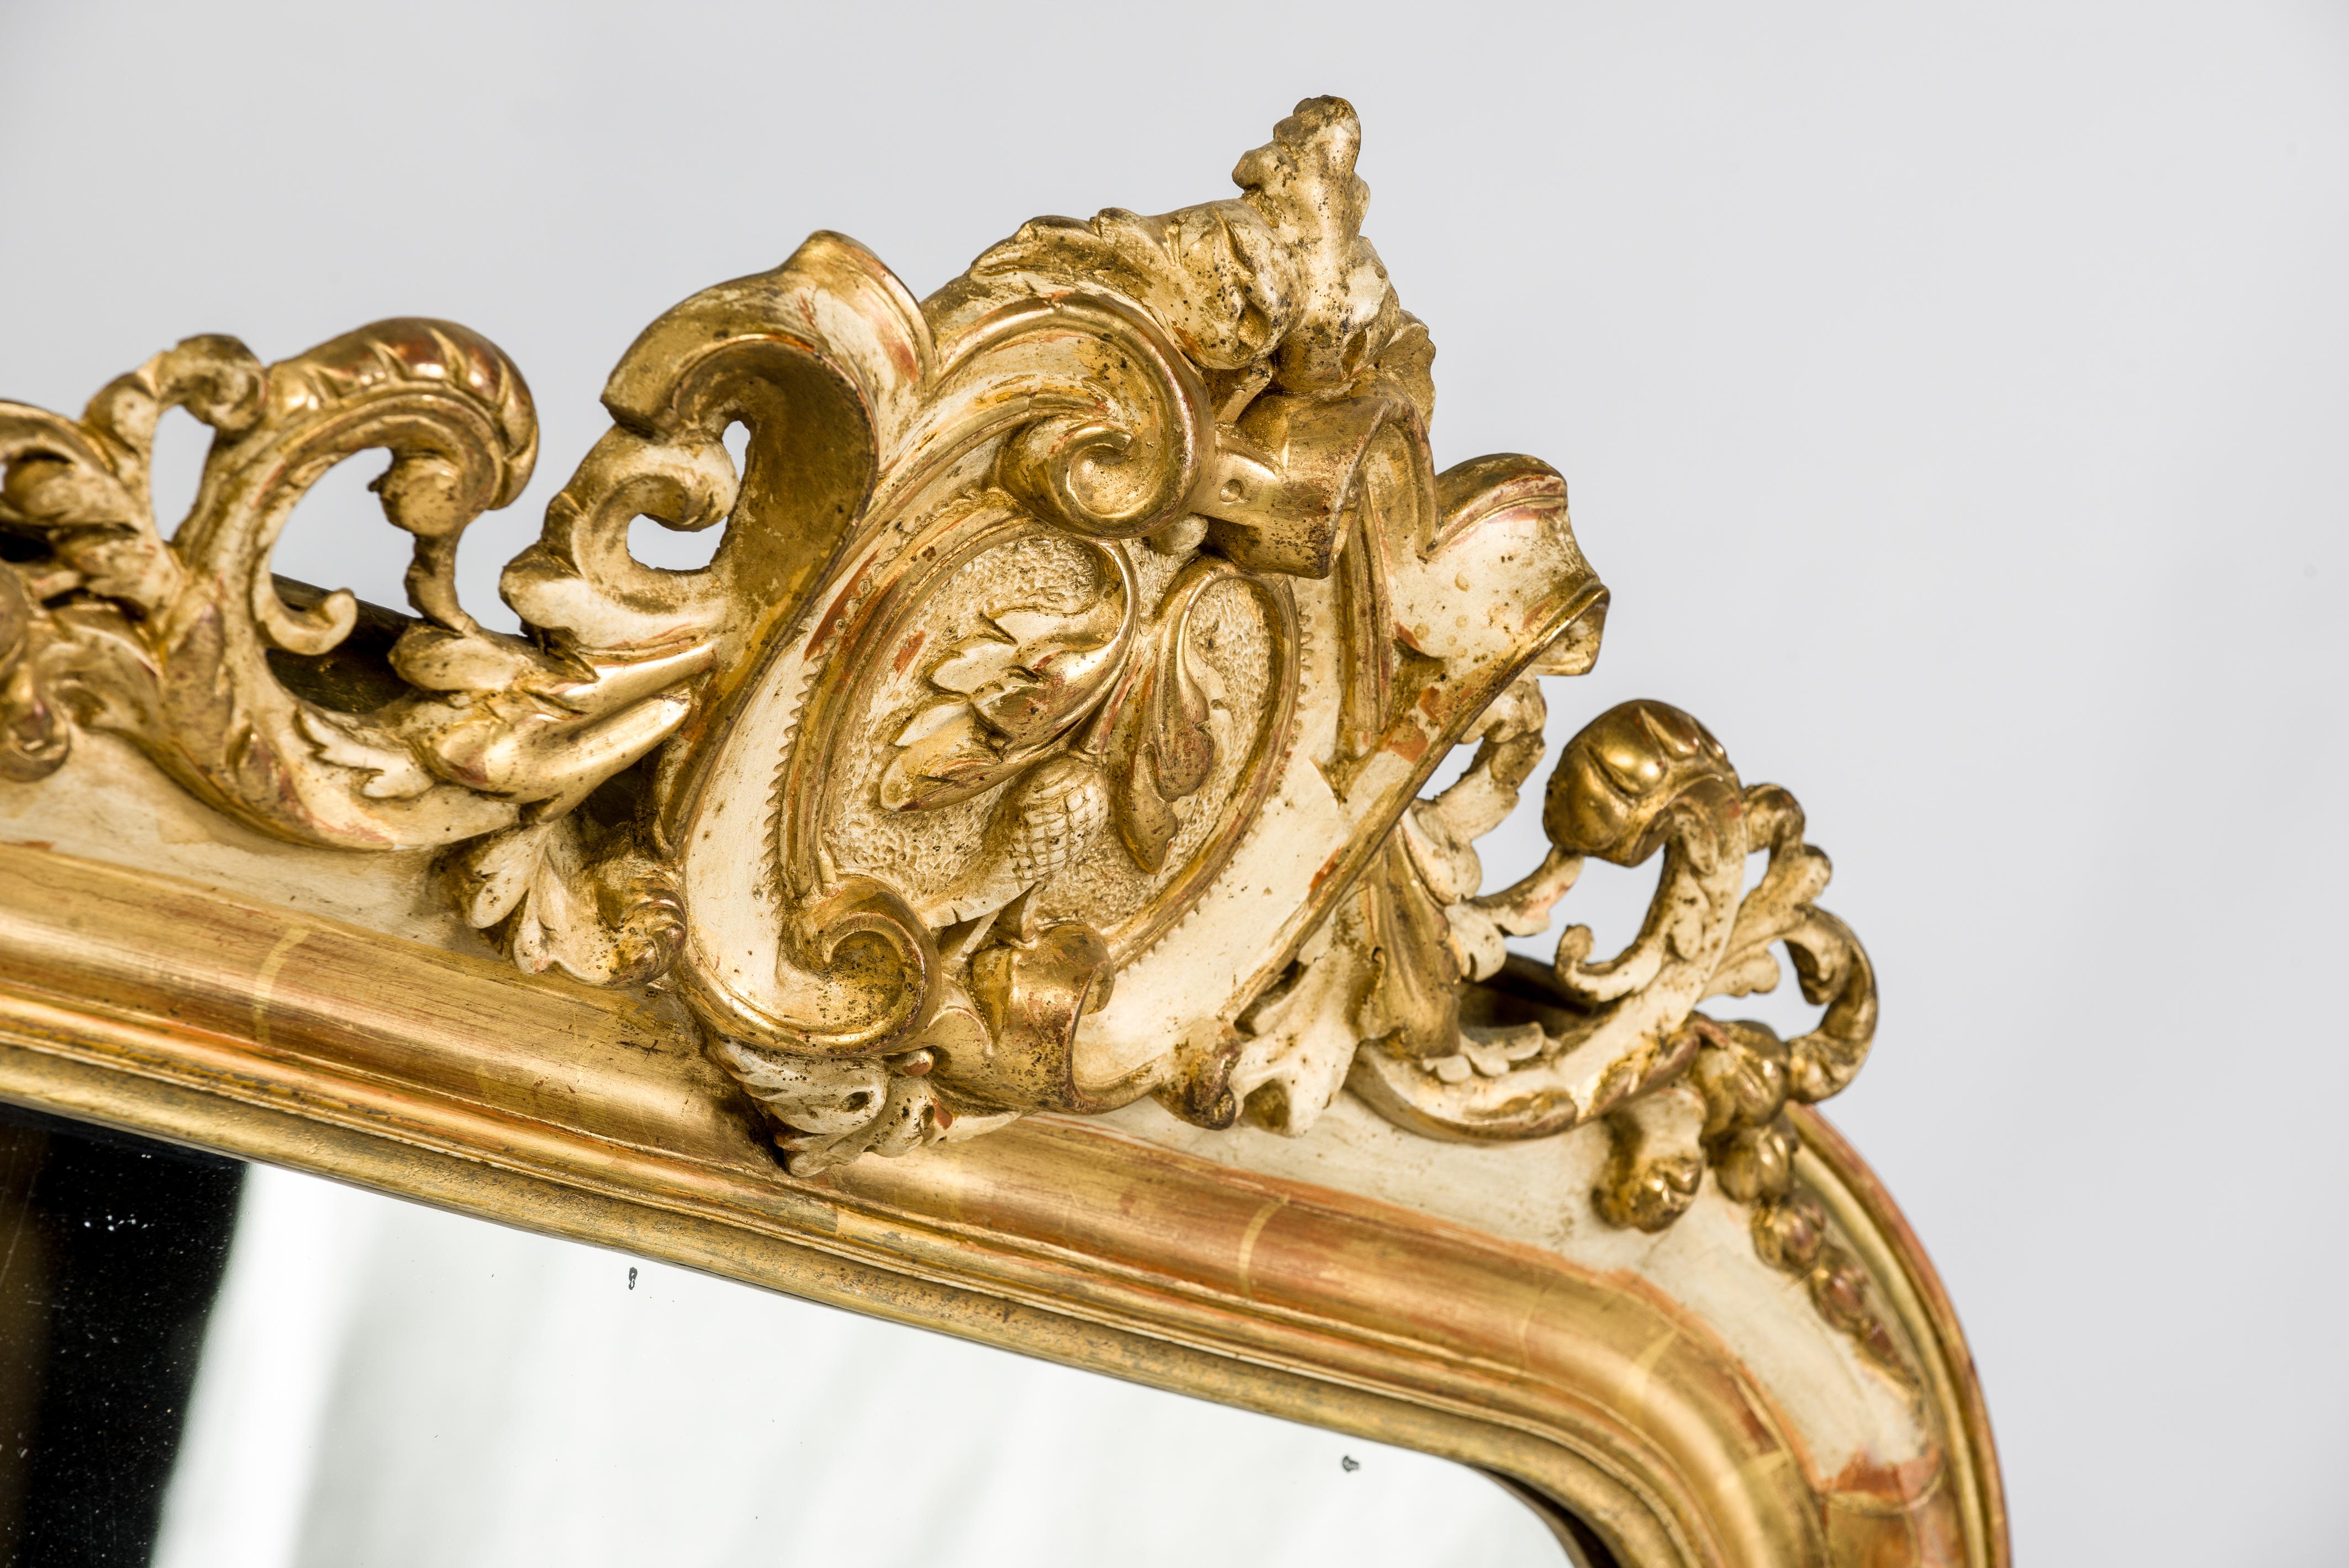 This wonderful antique French mirror has the typical rounded upper corners of a Louis Philippe mirror. The frame is enriched with acanthus ornaments and a beautiful ornate crest on top. 
The frame was partially gold leaf gild and gold paint gilt.